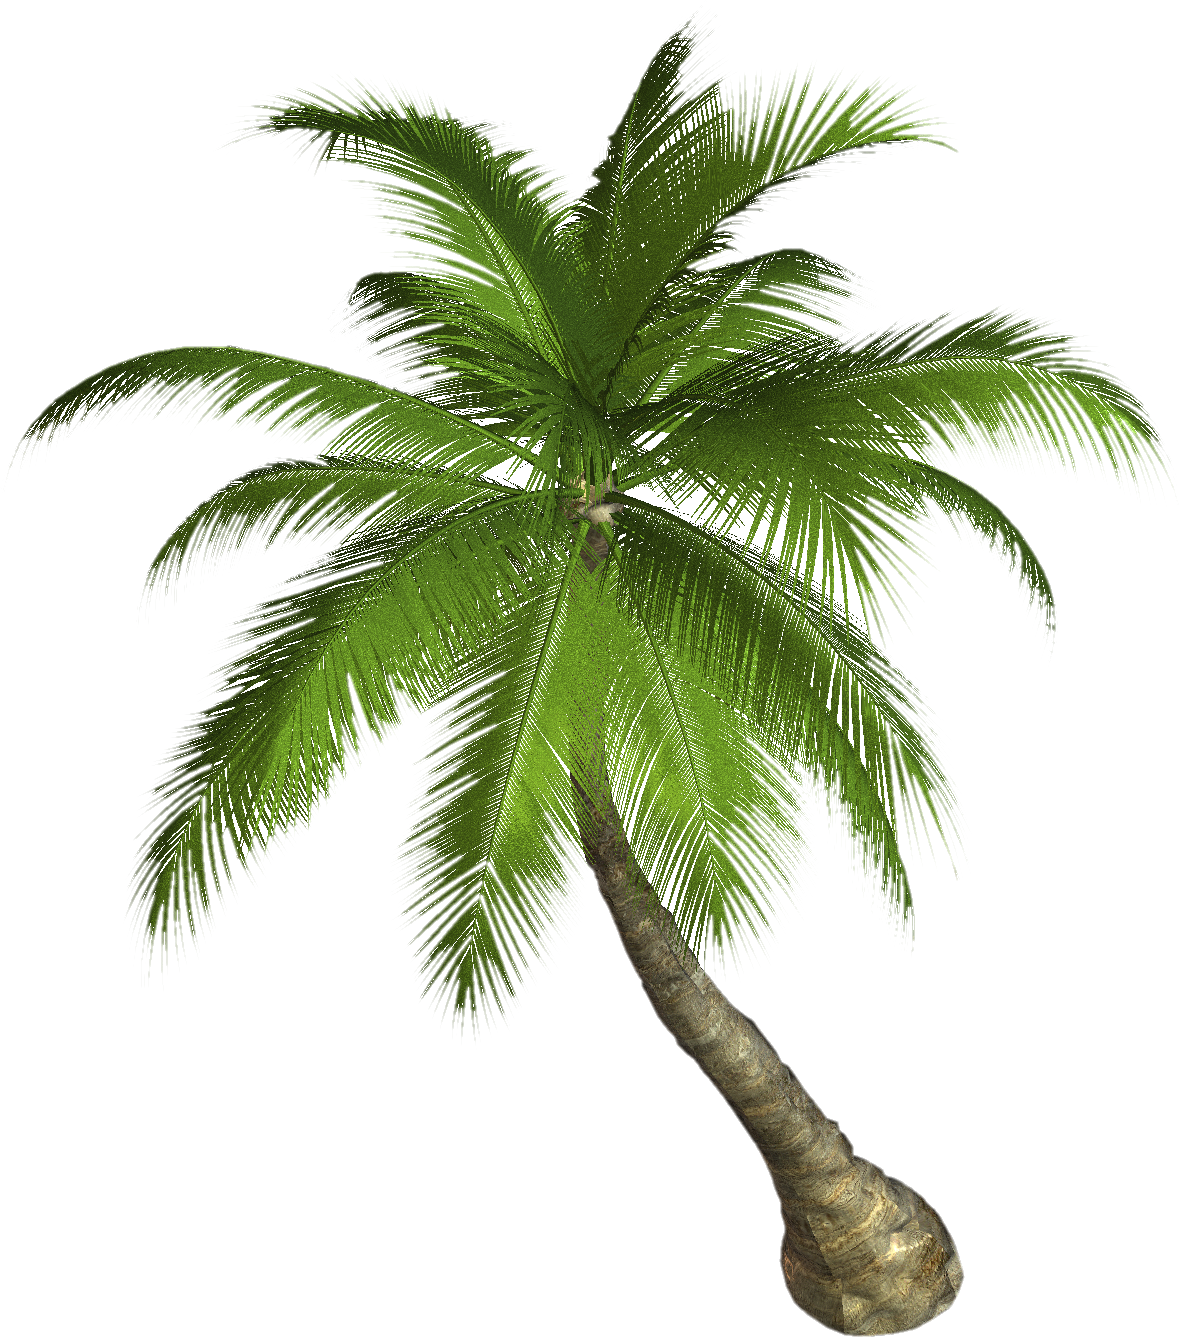 Palm tree PNG images, download free pictures.